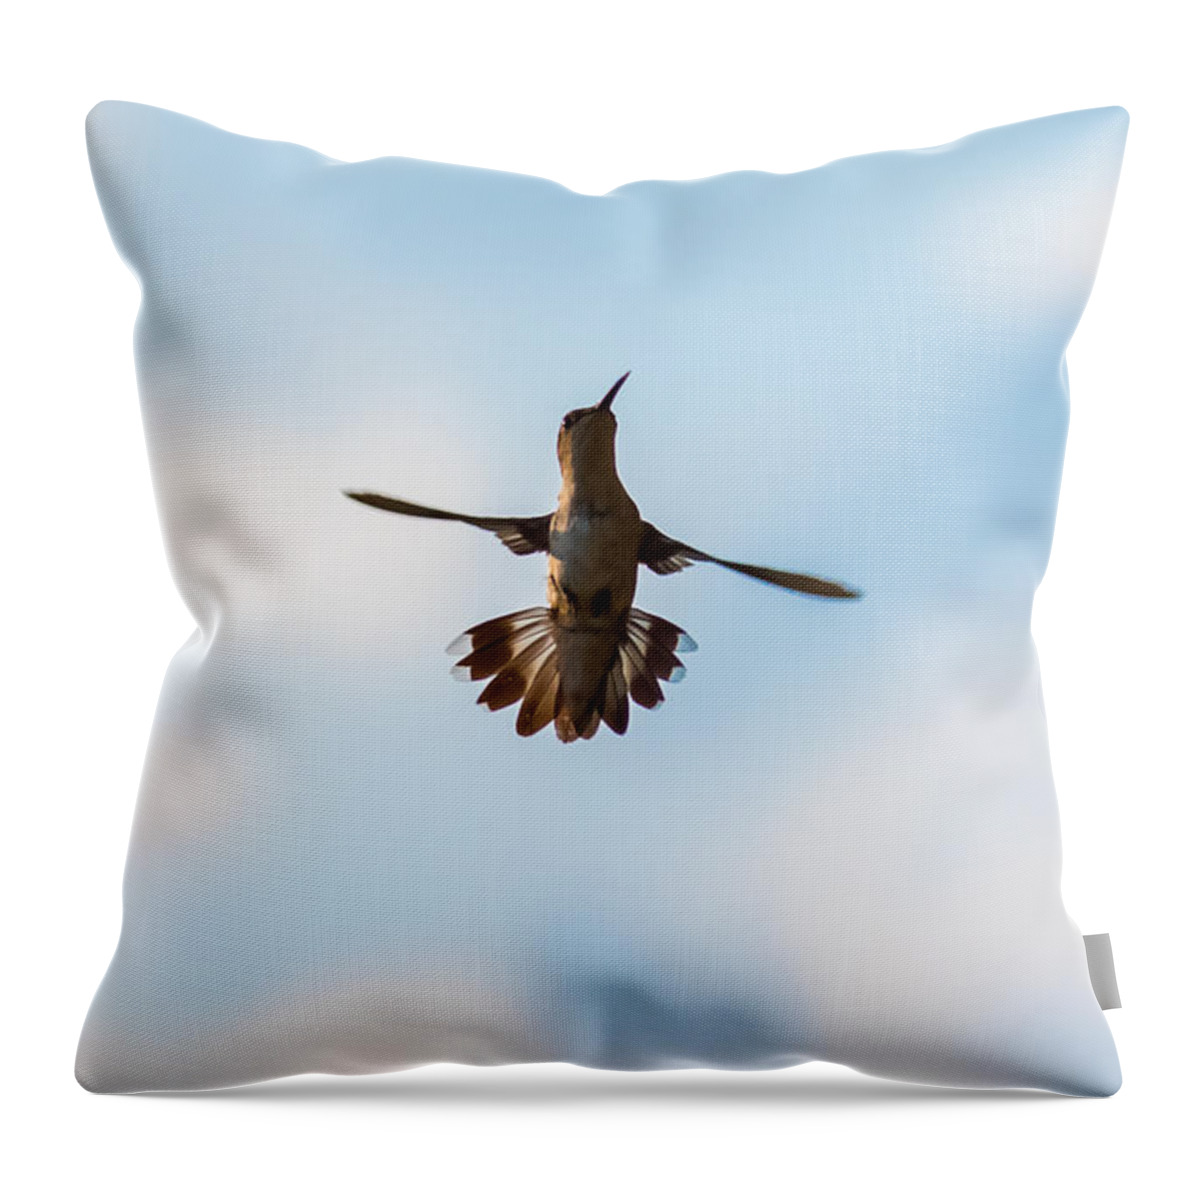 Hummingbird Throw Pillow featuring the photograph Hummingbird by Holden The Moment